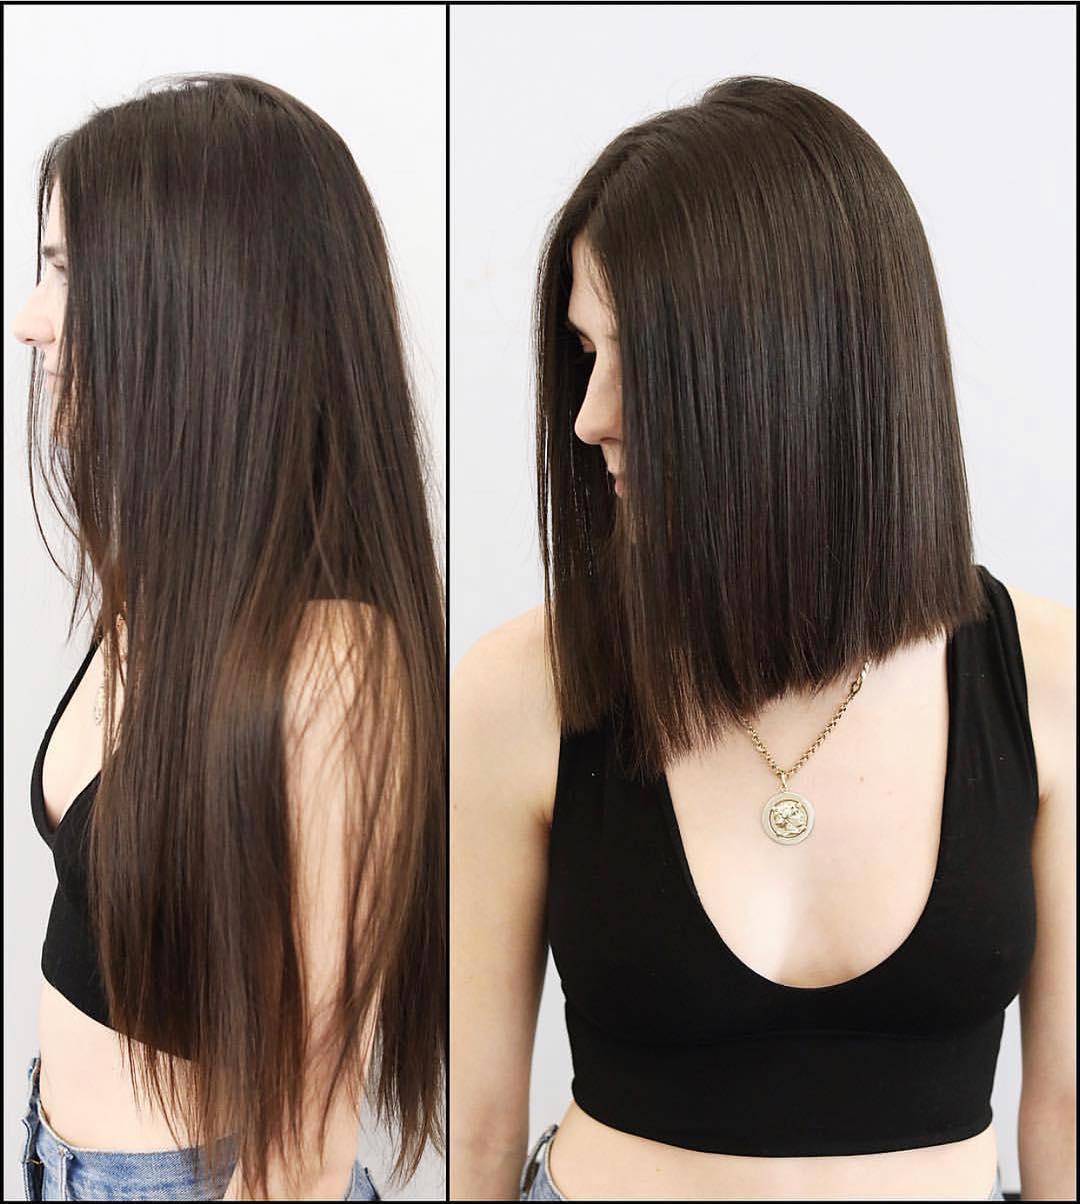 10 Stylish Lob Hairstyle Ideas Best Shoulder Length Hair For Women 2020